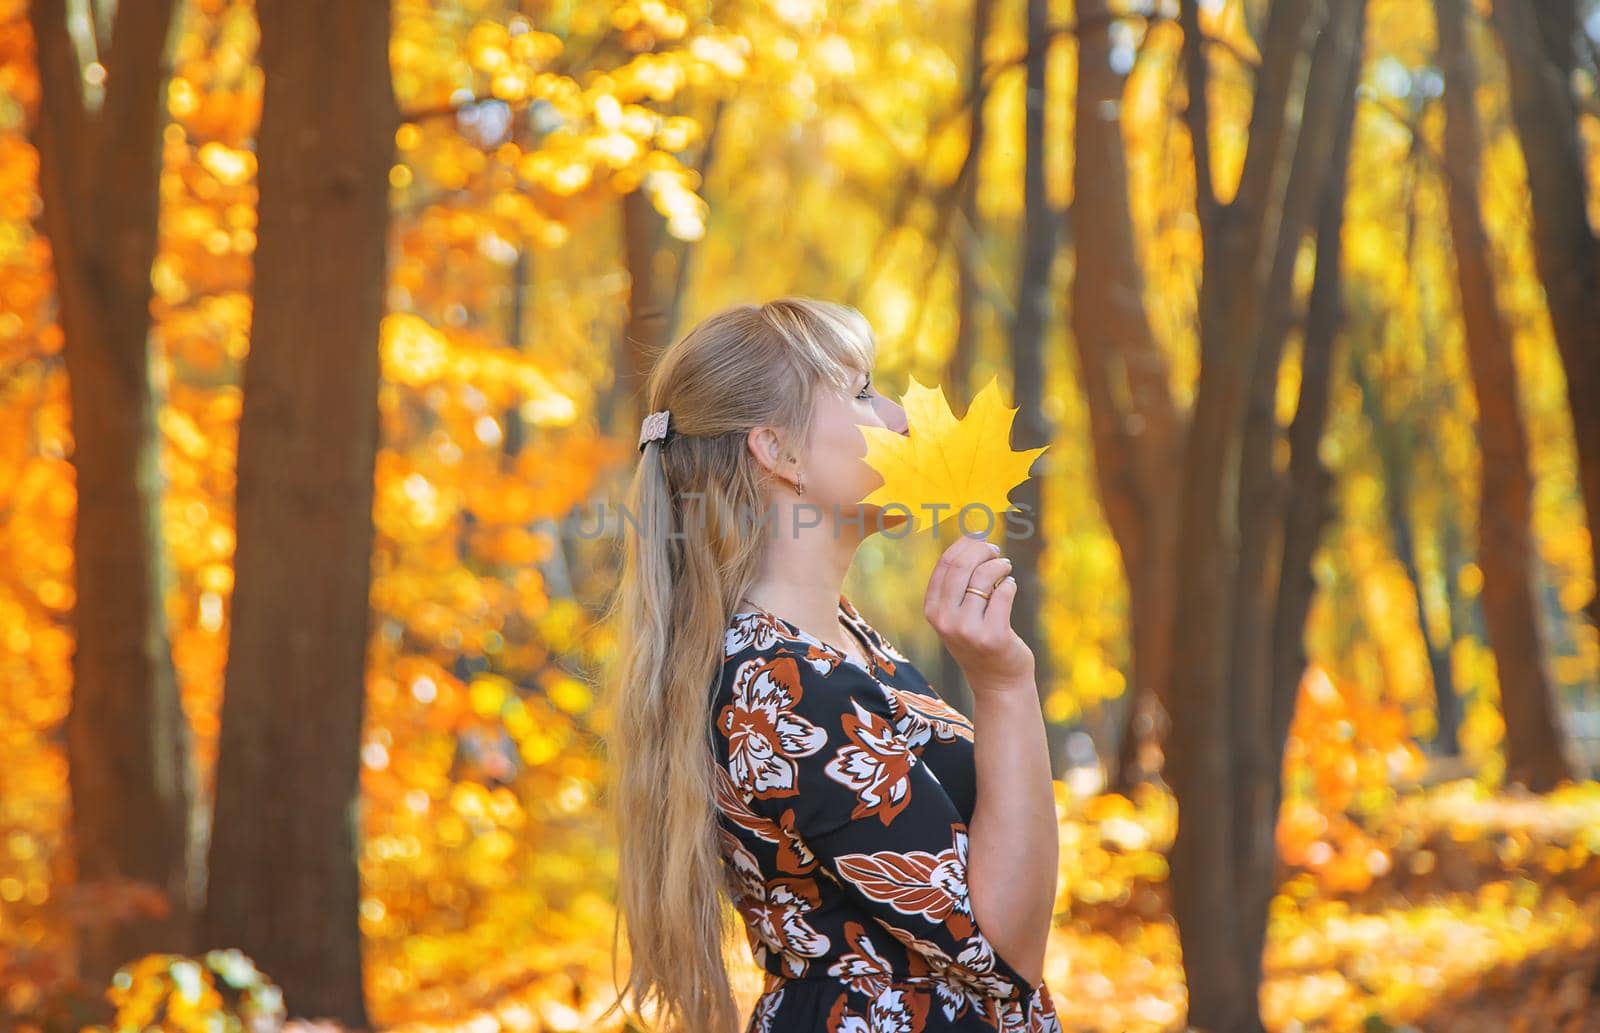 Girl in the autumn park. Selective focus.